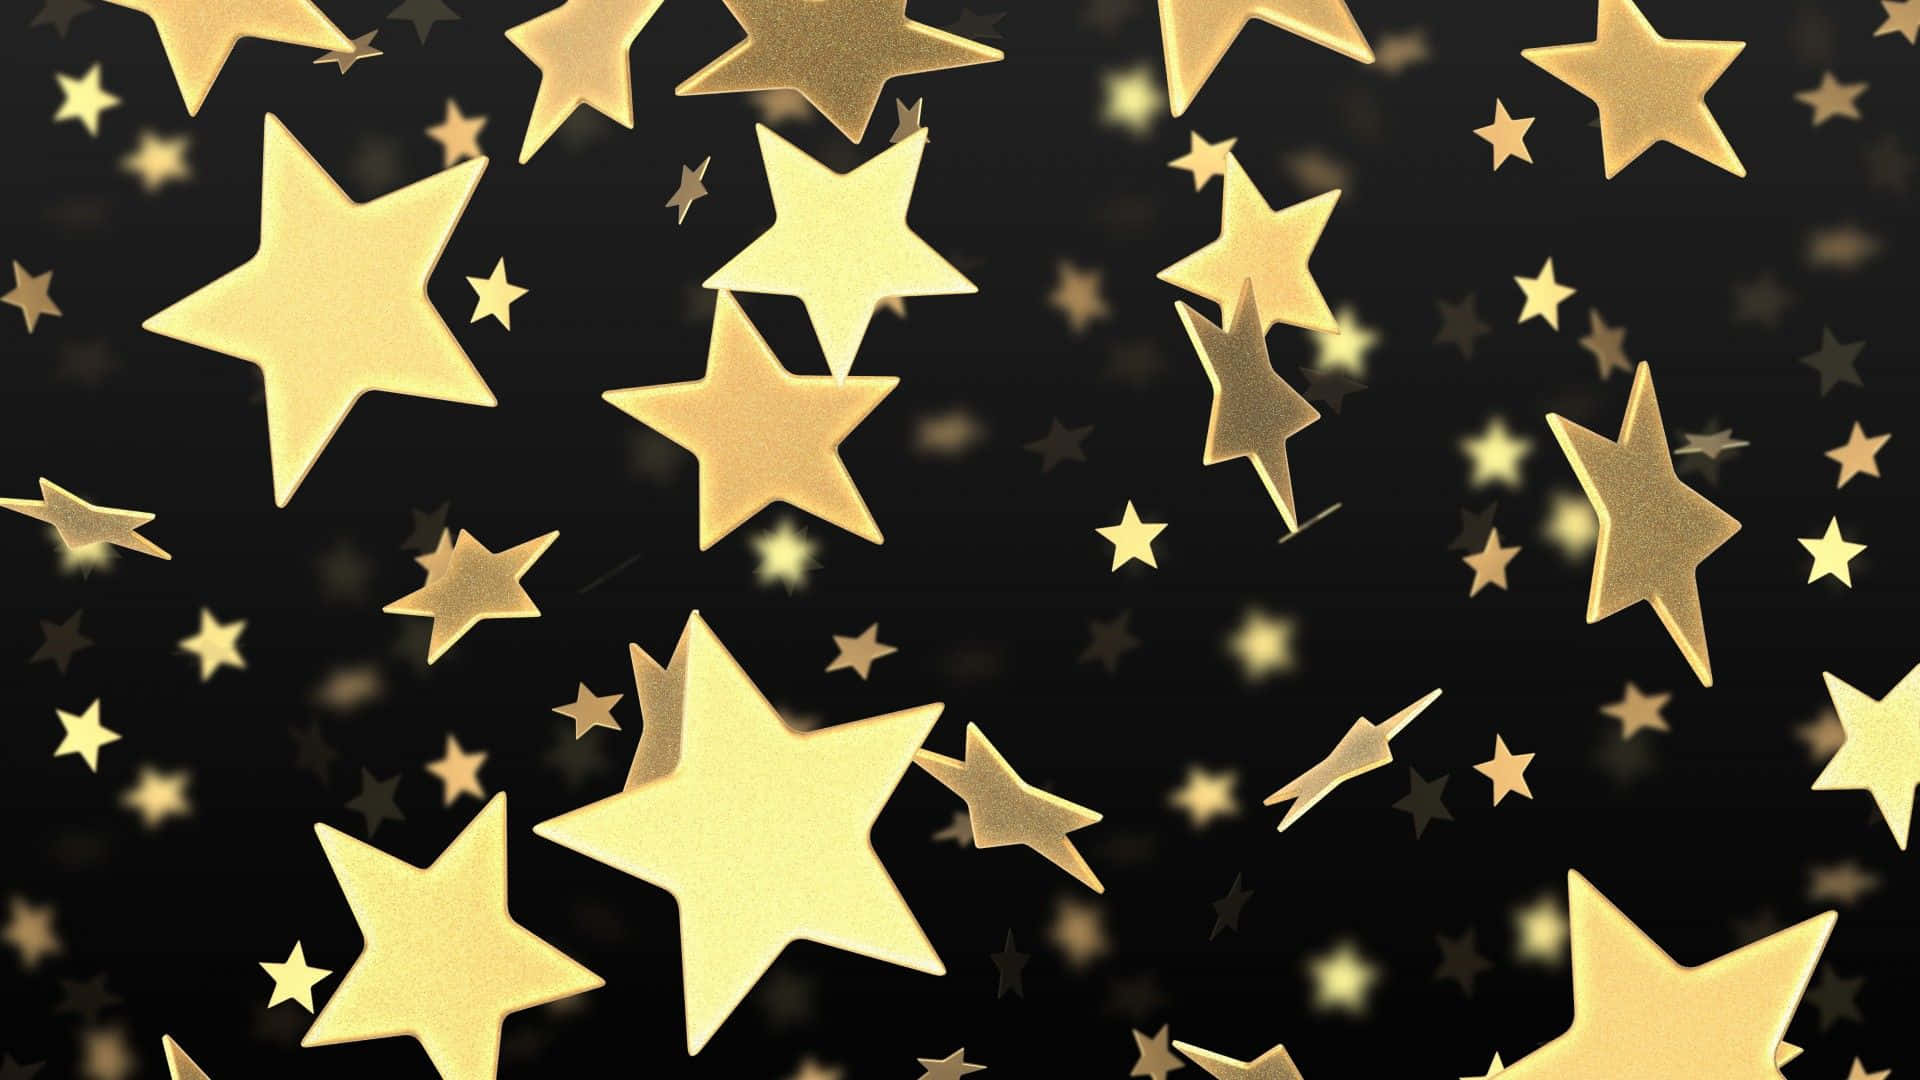 Reach for the stars – A wall of shining gold stars. Wallpaper